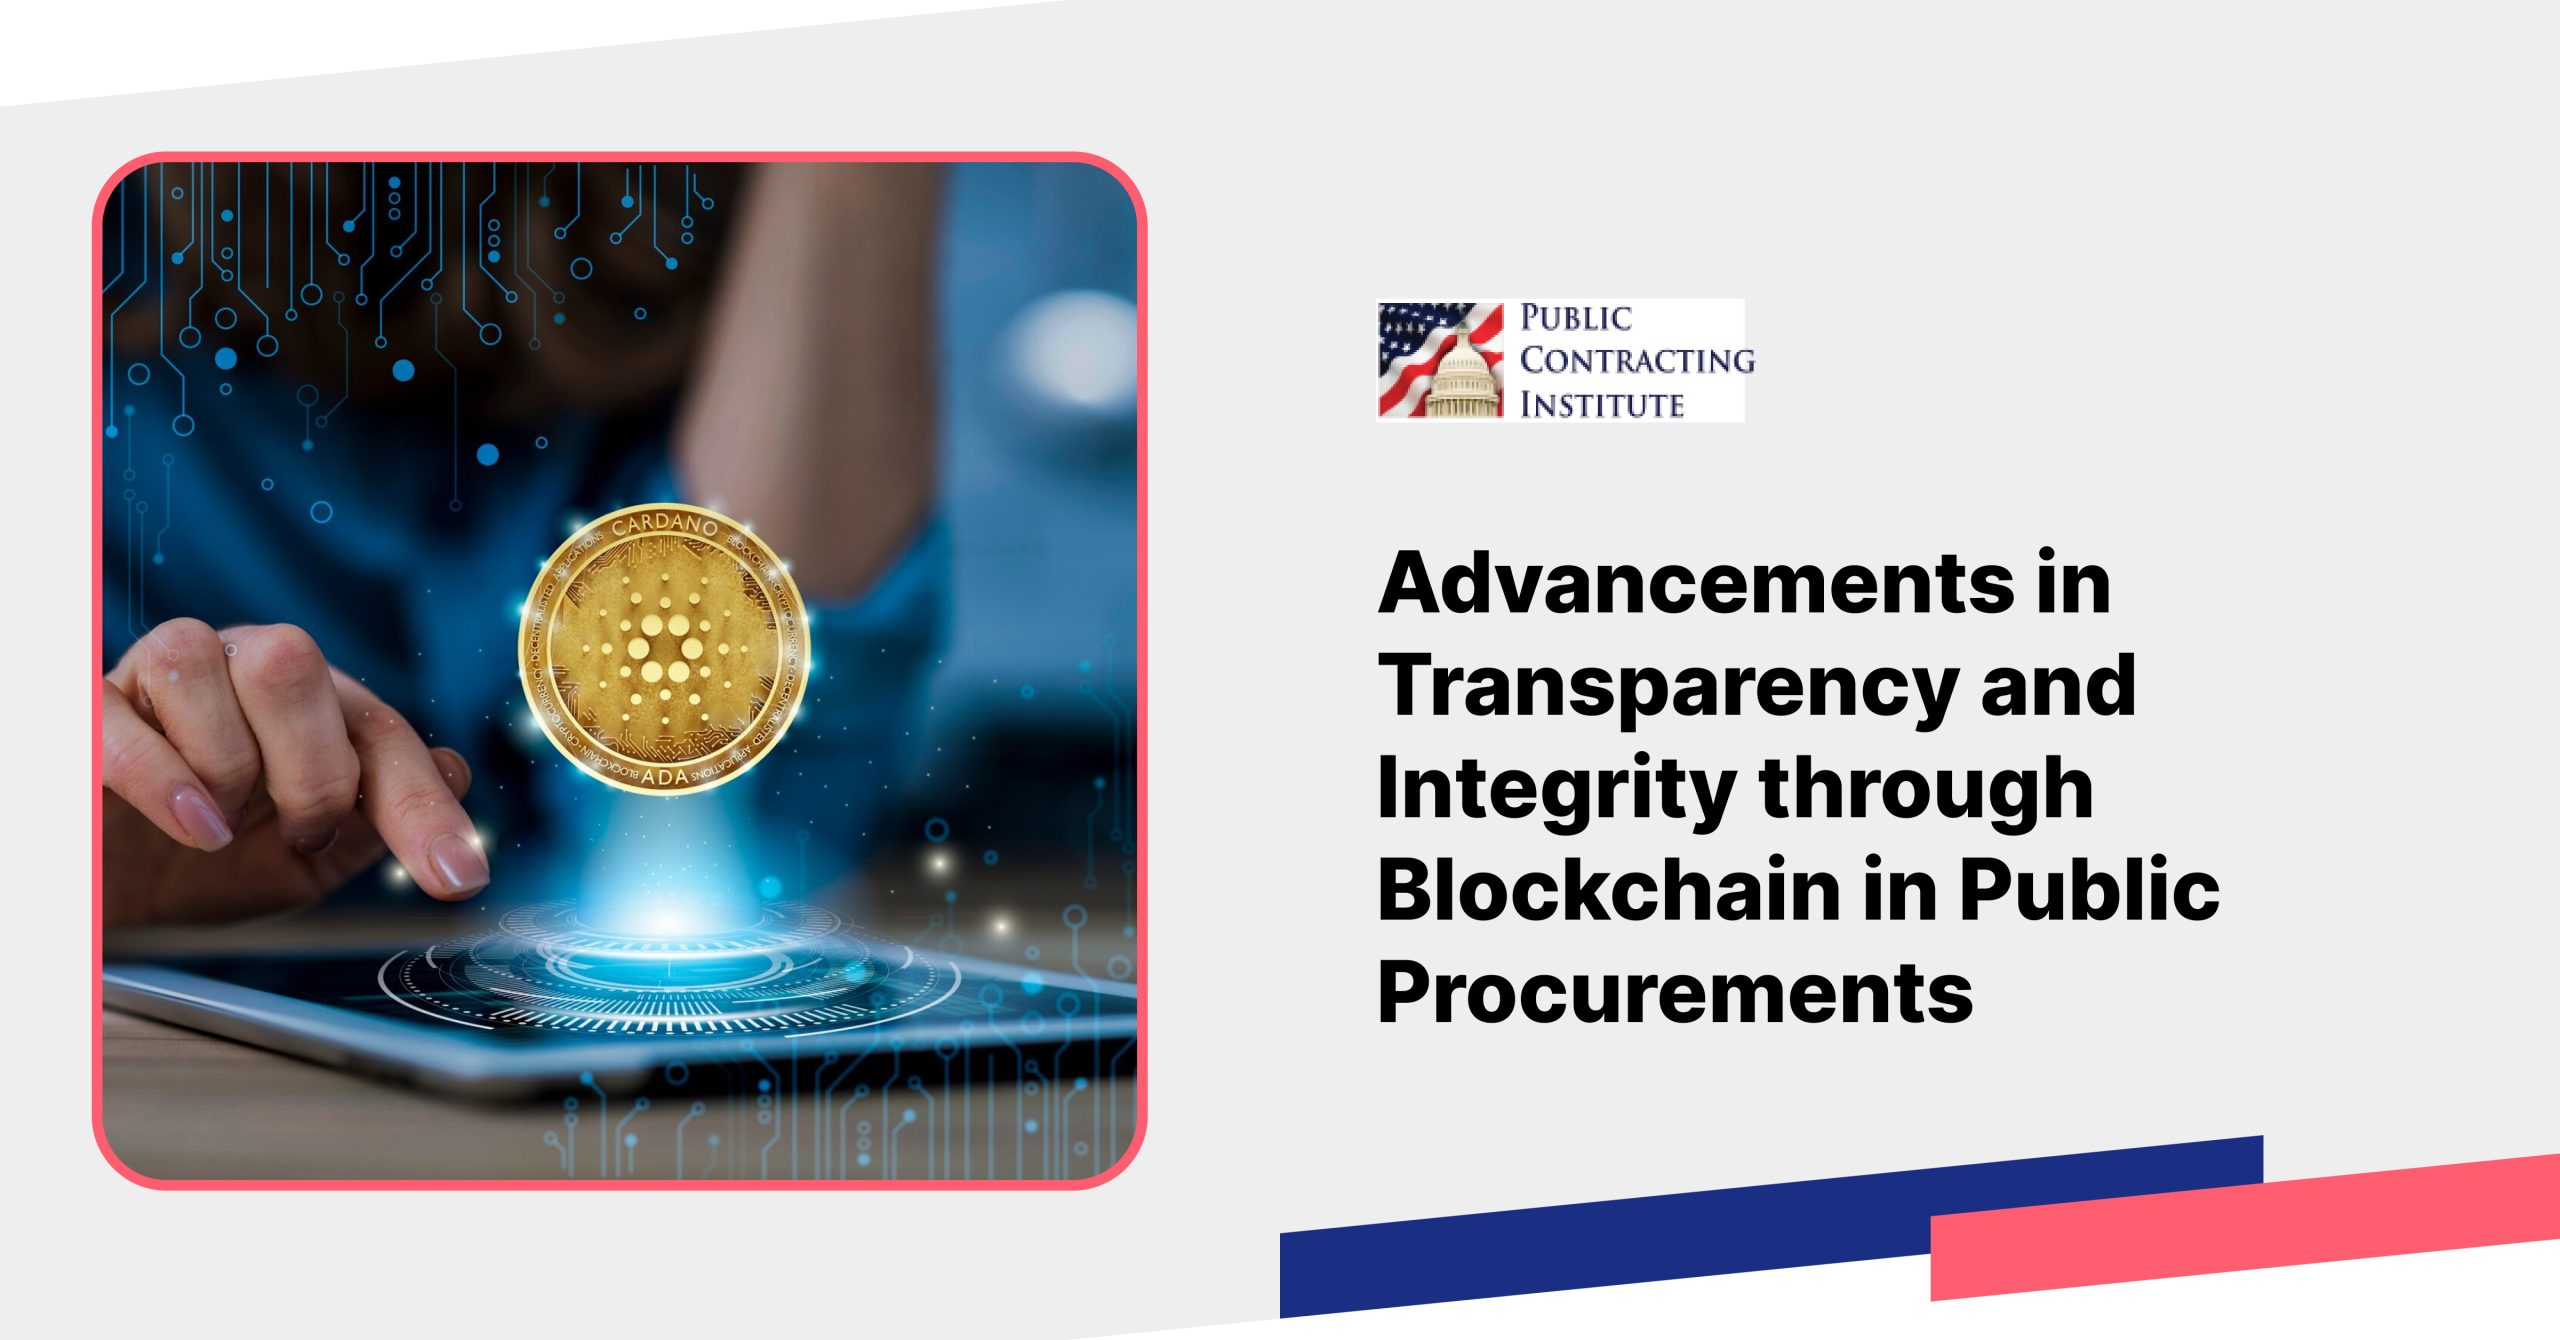 Advancements in Transparency and Integrity through Blockchain in Public Procurements - Public Contracting Institute - Government Contracts Training